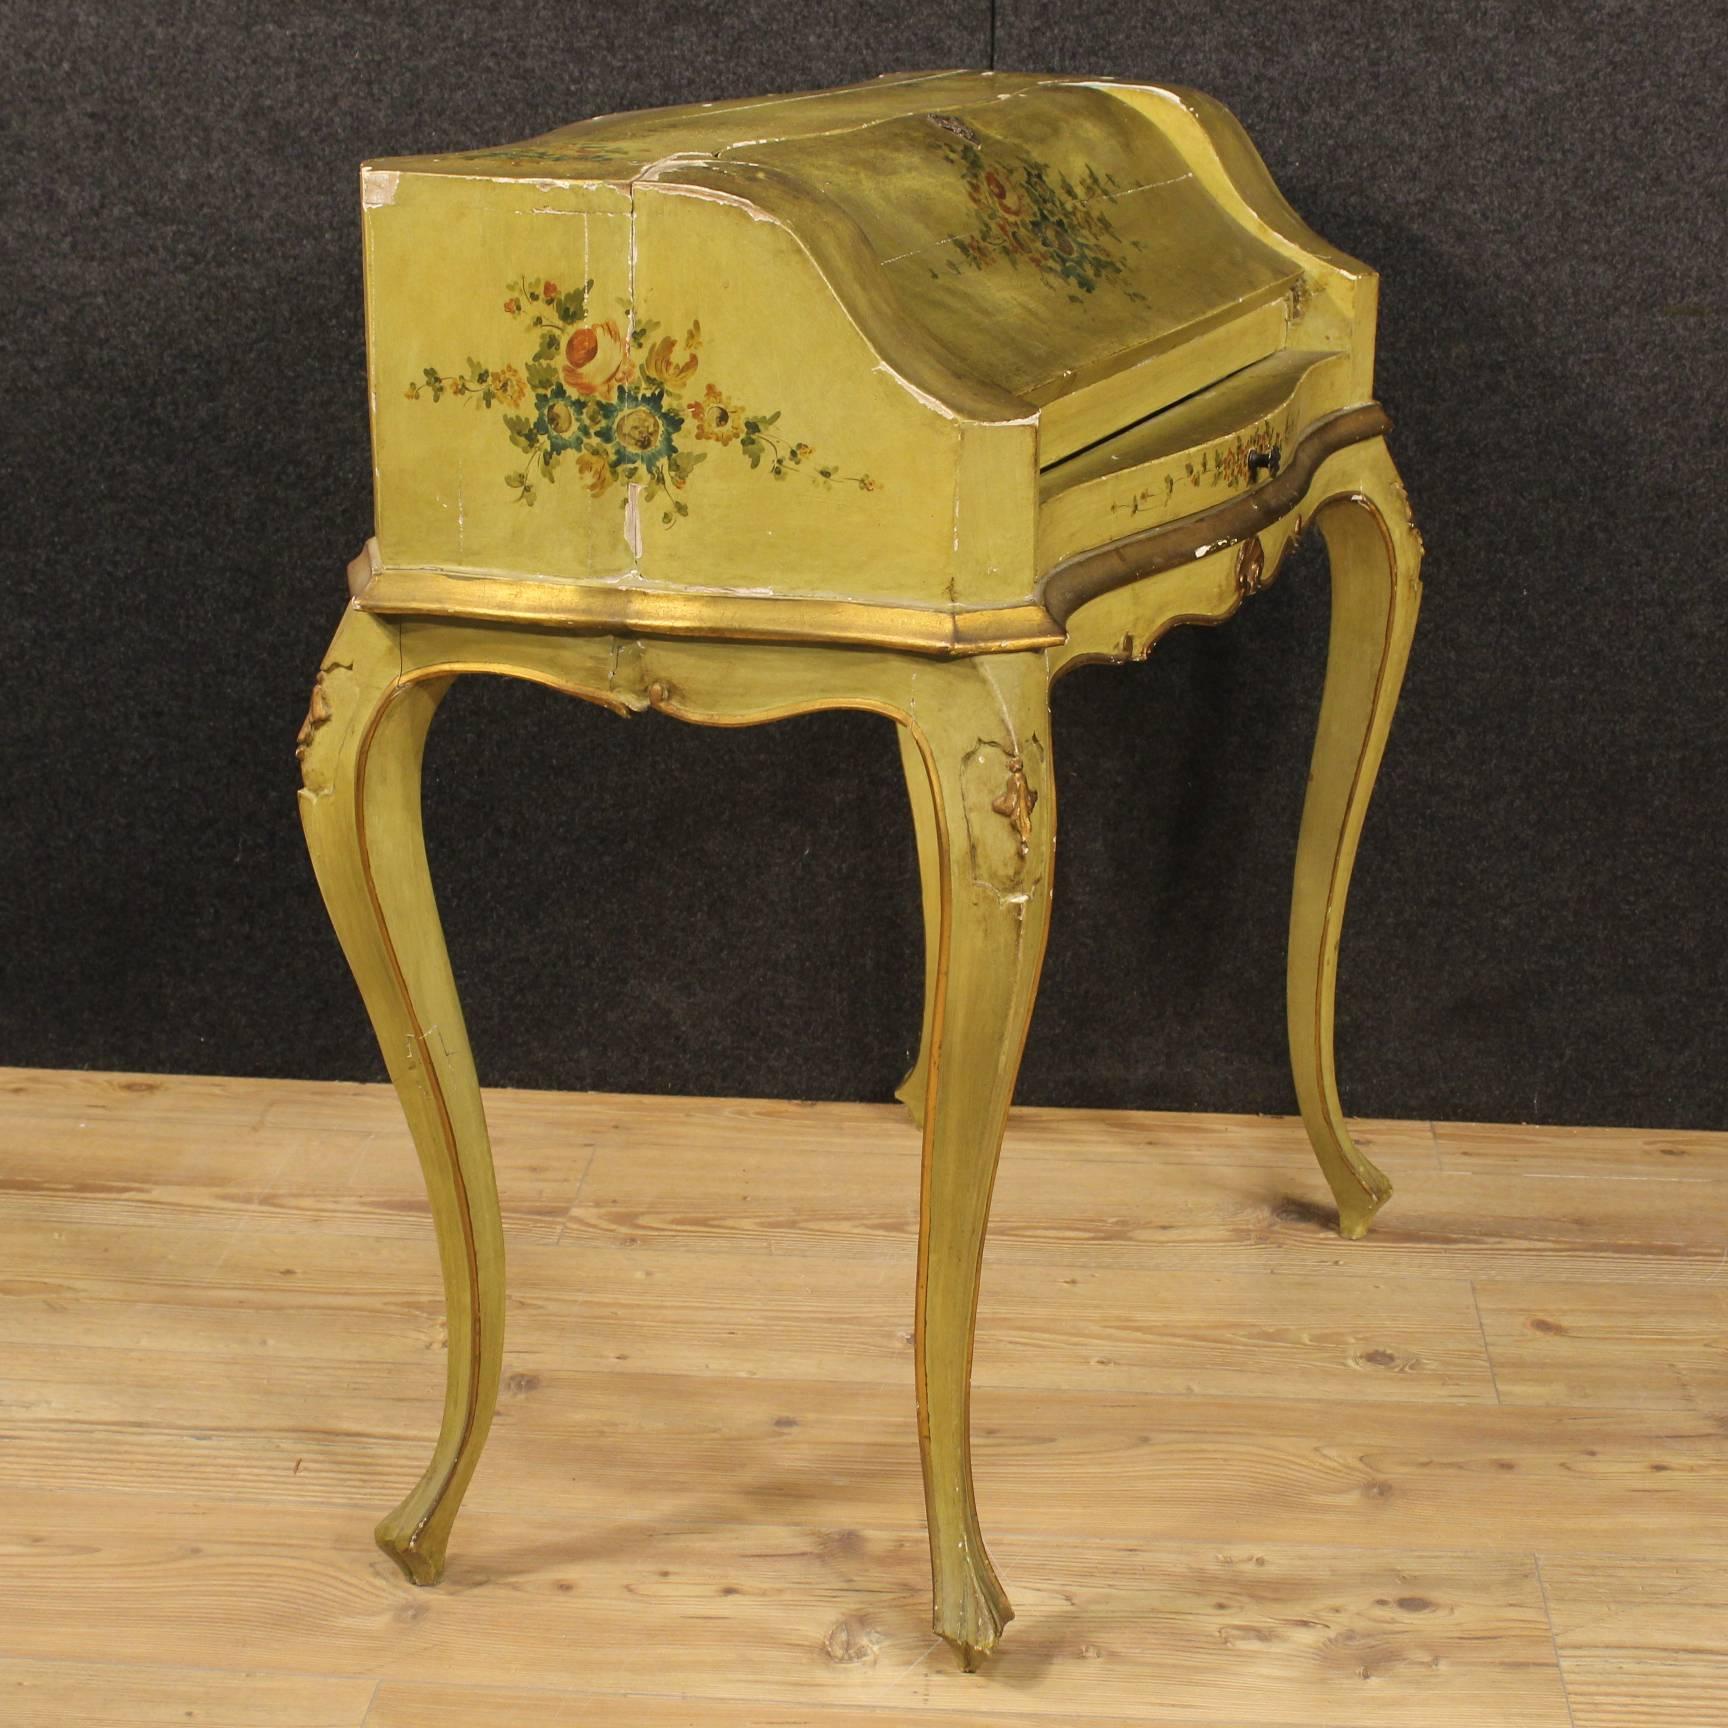 Pretty Venetian bureau of the 20th century. Furniture made by ornately carved, lacquered, gilded and painted with floral decorations wood of great taste and nice decoration. Bureau with high leg finished from center equipped with an external drawer